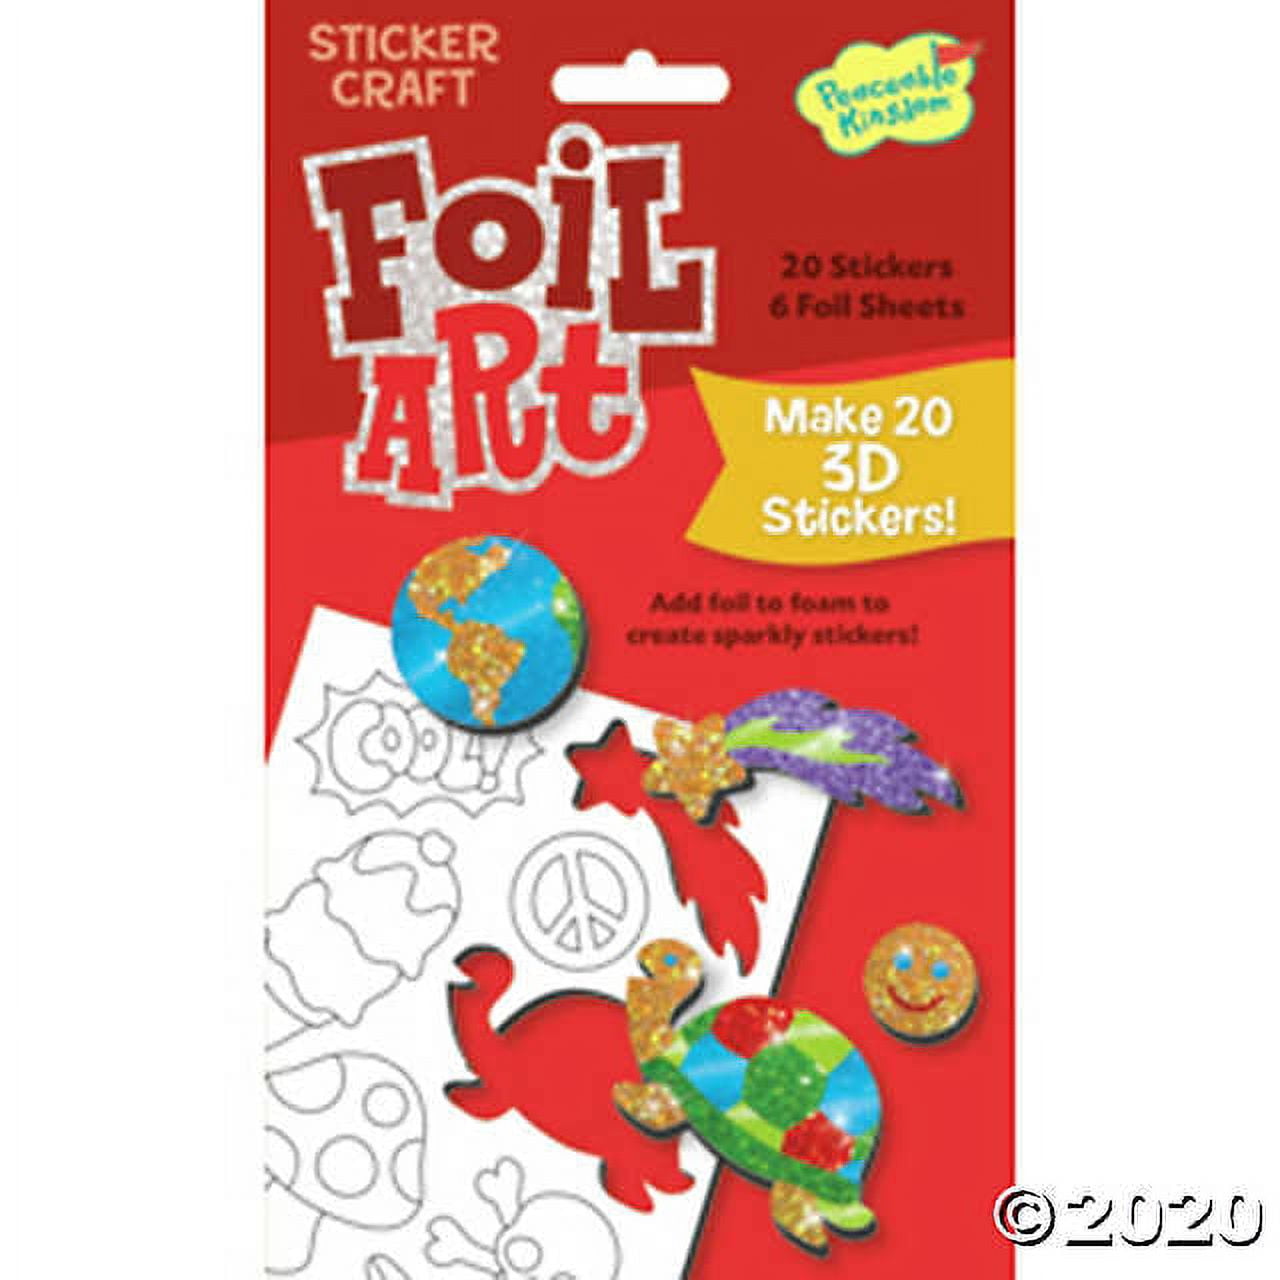 Foil Art Craft Kit 6 Pack Sticker Picture Peel and Paste Sparkly